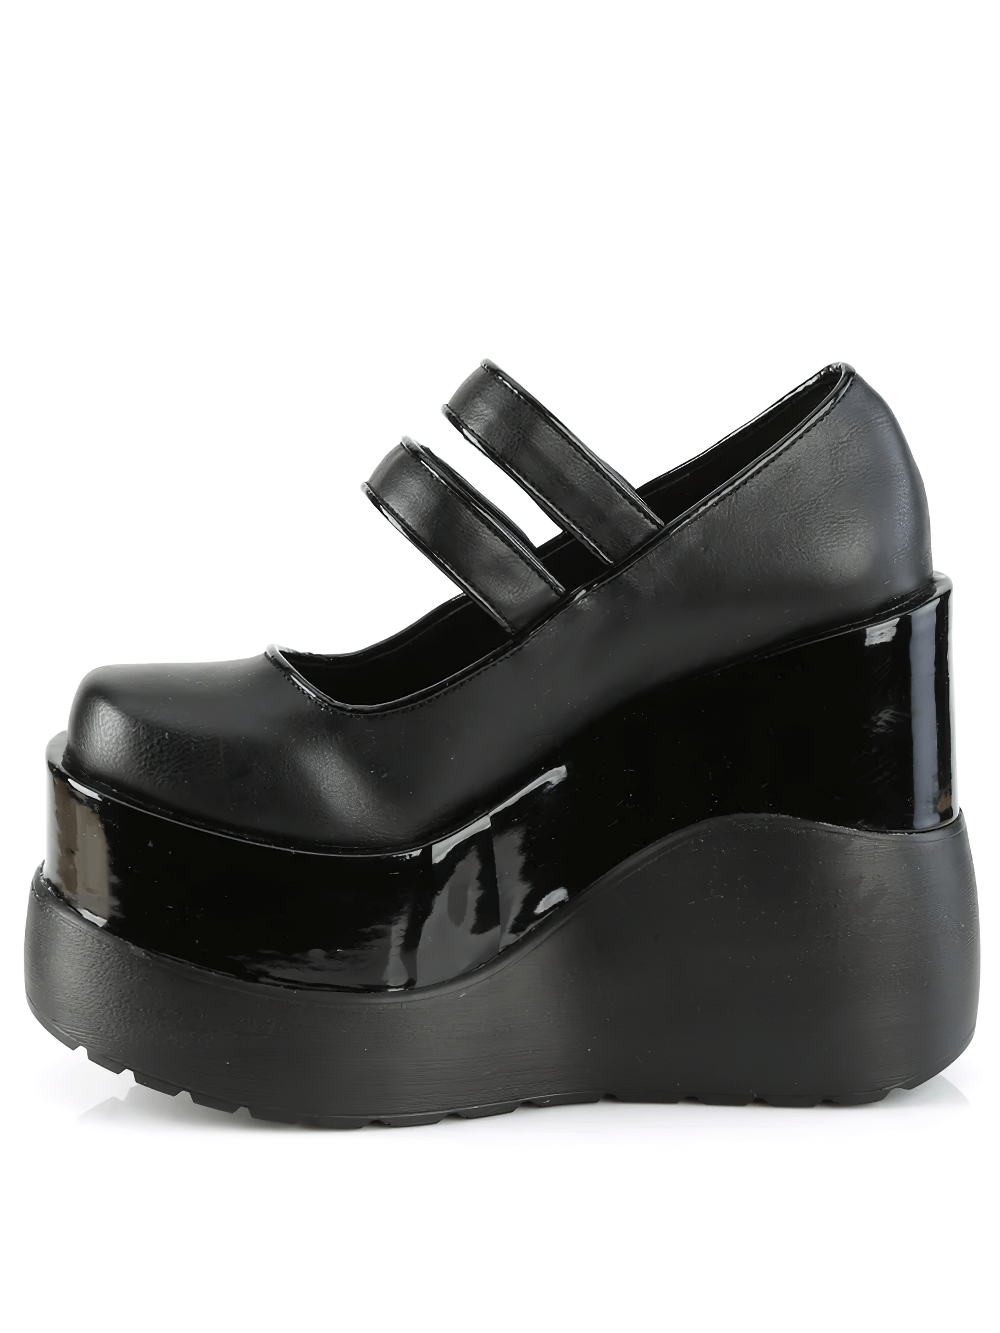 DEMONIA Tiered Platform Mary Jane Shoes with Dual Straps